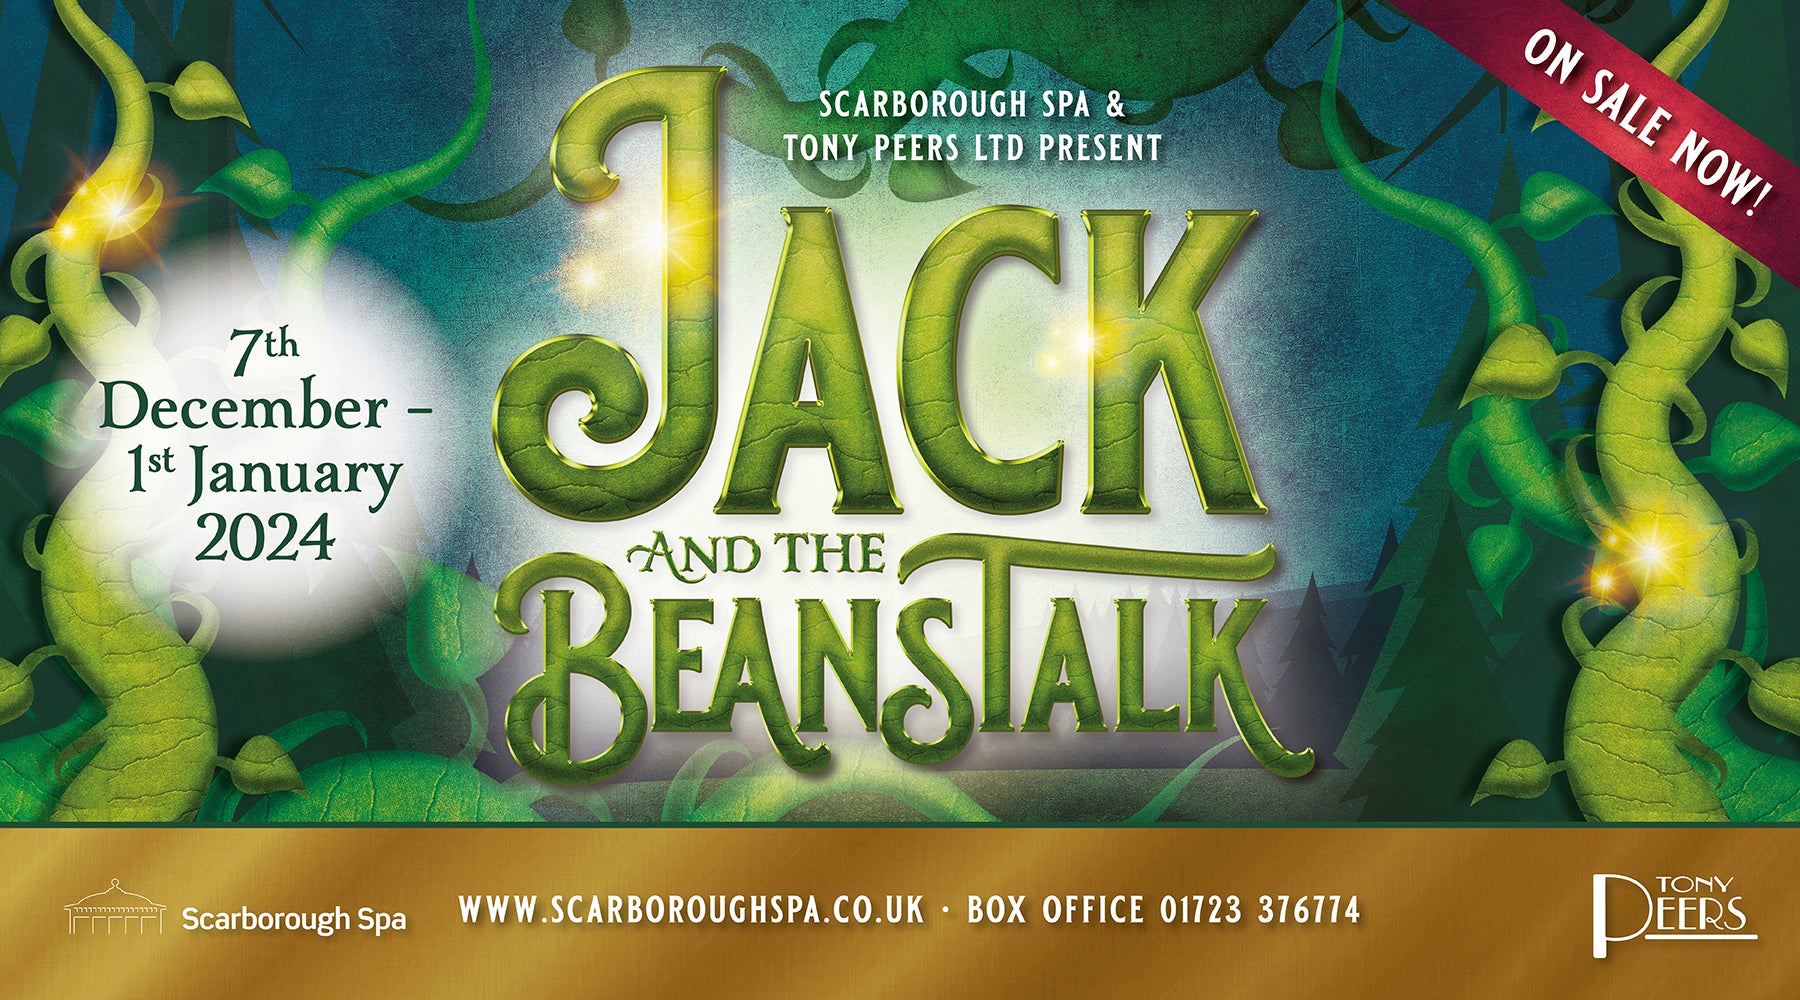 Image name Jack and the Beanstalk at Scarborough Spa Theatre Scarborough the 27 image from the post Jack and the Beanstalk at Scarborough Spa Theatre, Scarborough in Yorkshire.com.